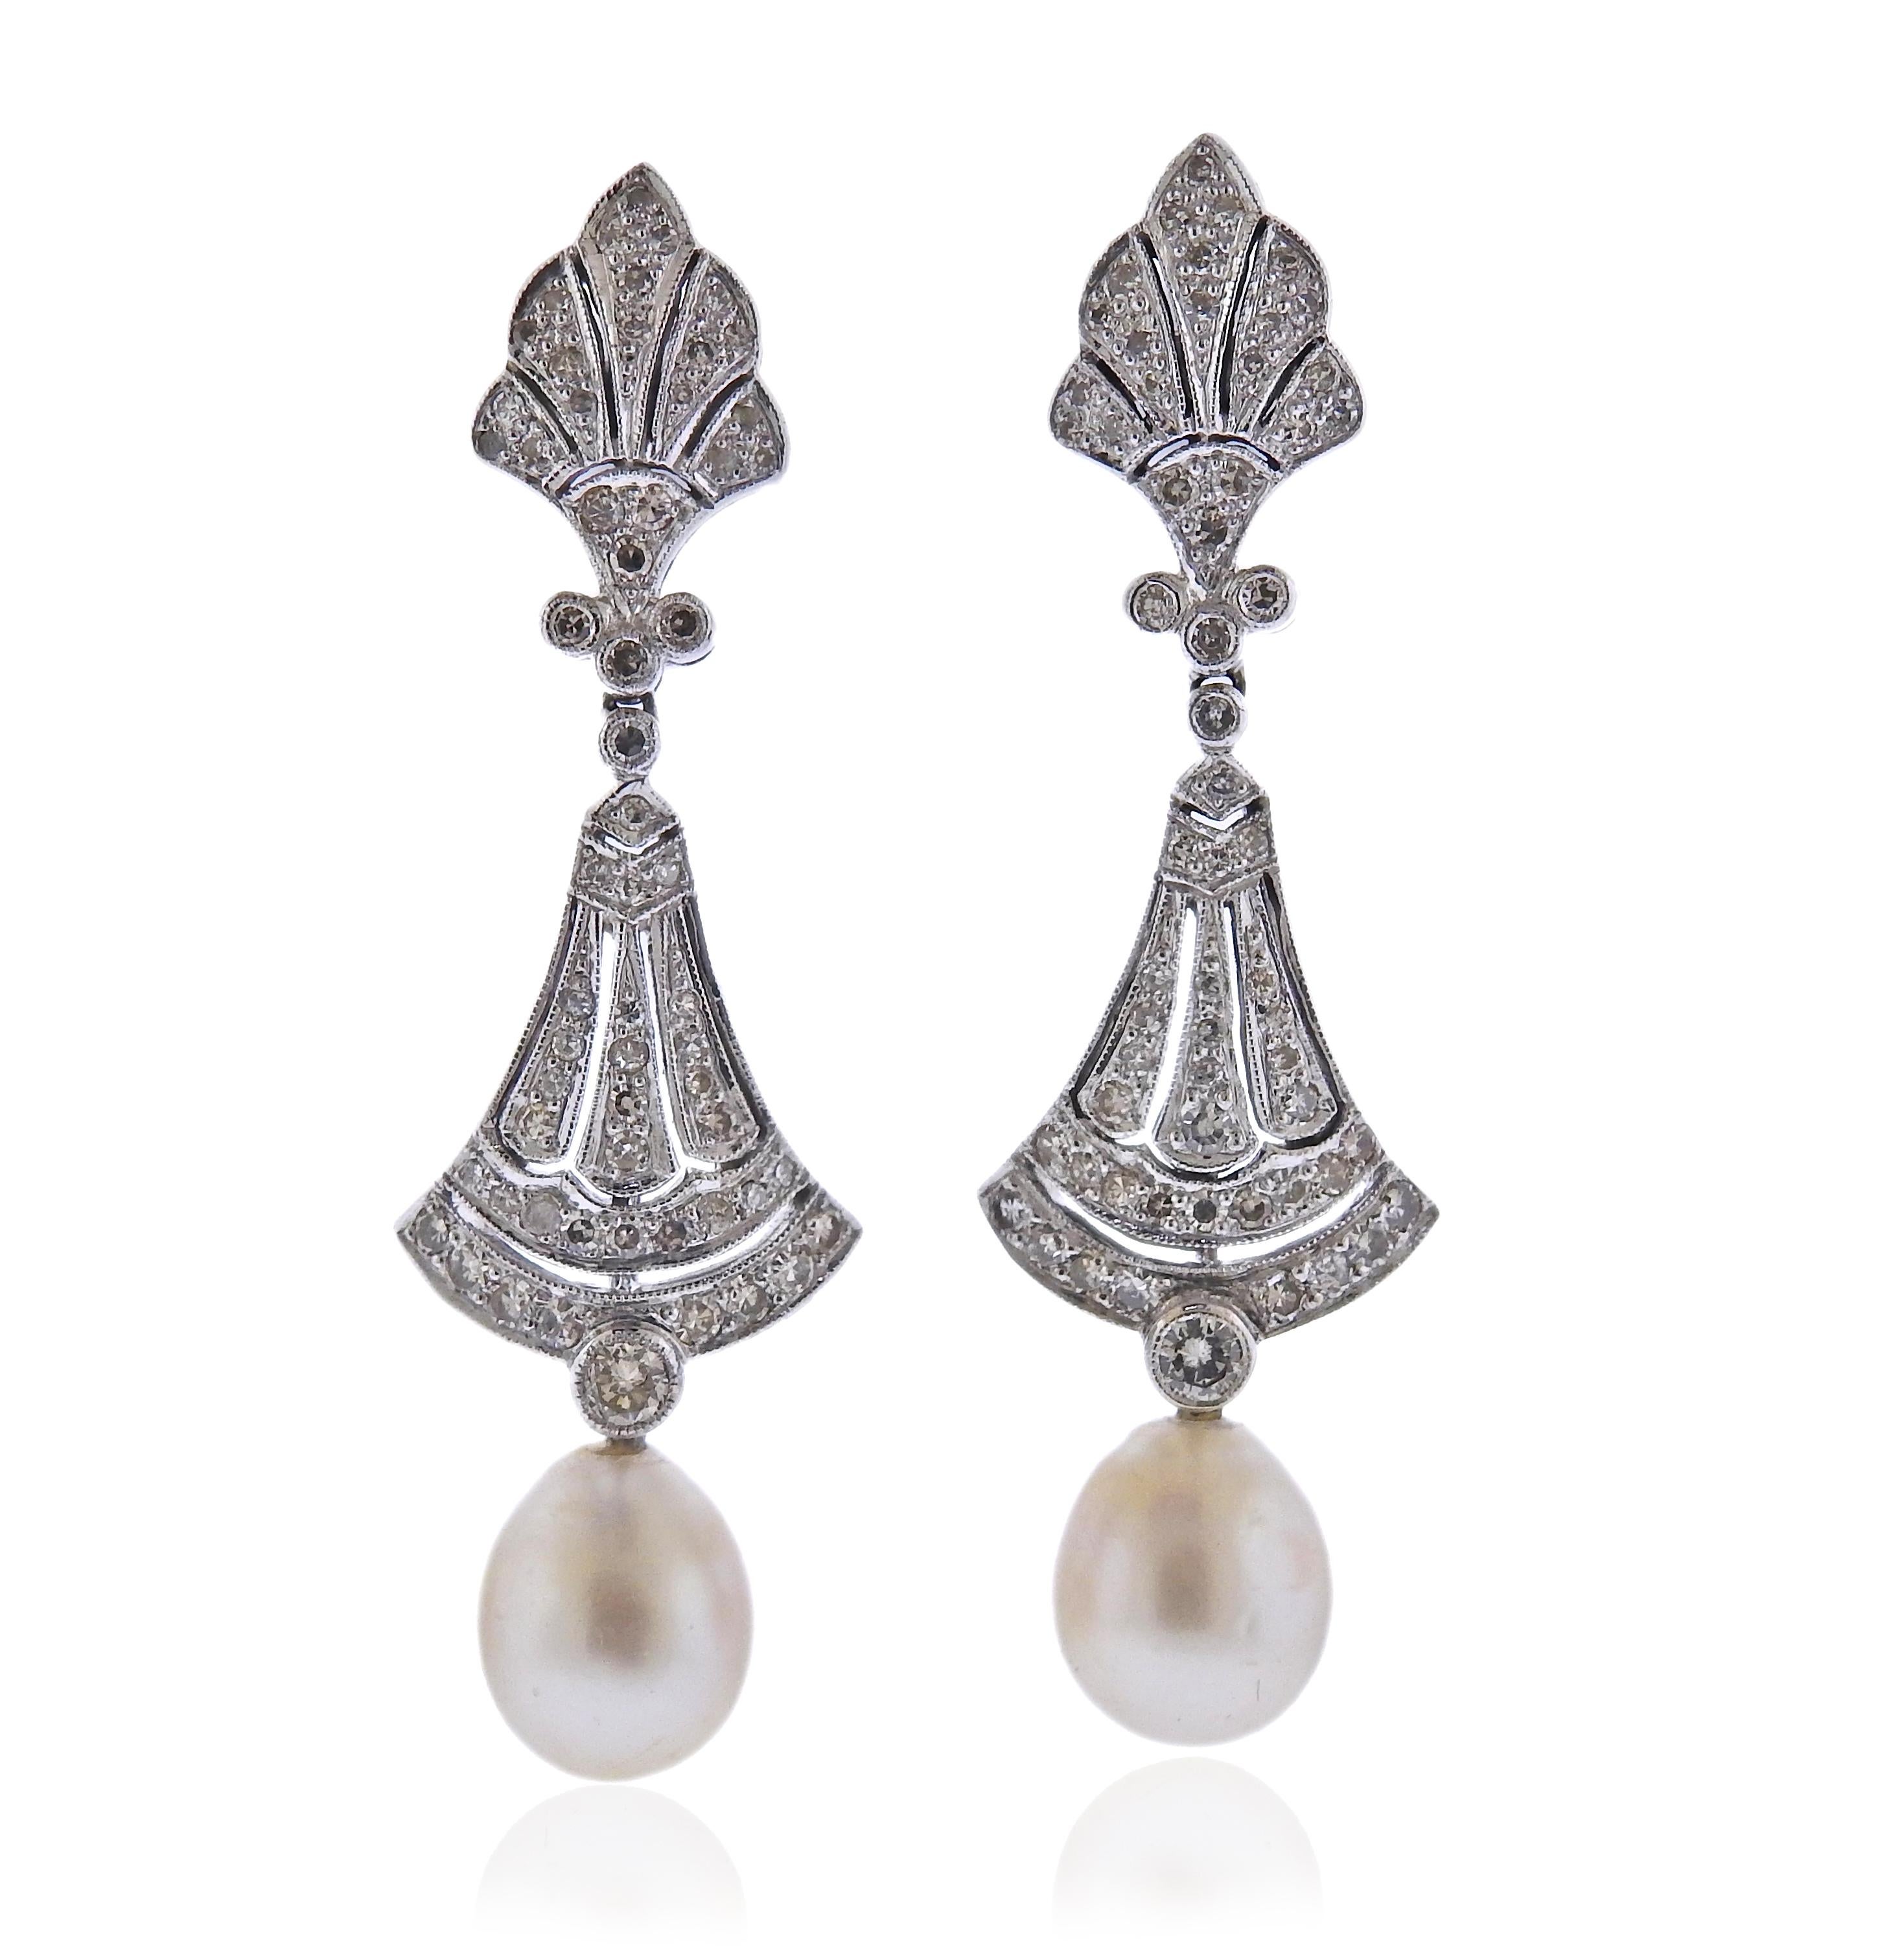 Pair of 18k white gold earrings with pearls and approx. 0.66ctw  in SI/H diamonds.  Earrings are 50mm long, pearls are detachable. Weight 11.5 grams.